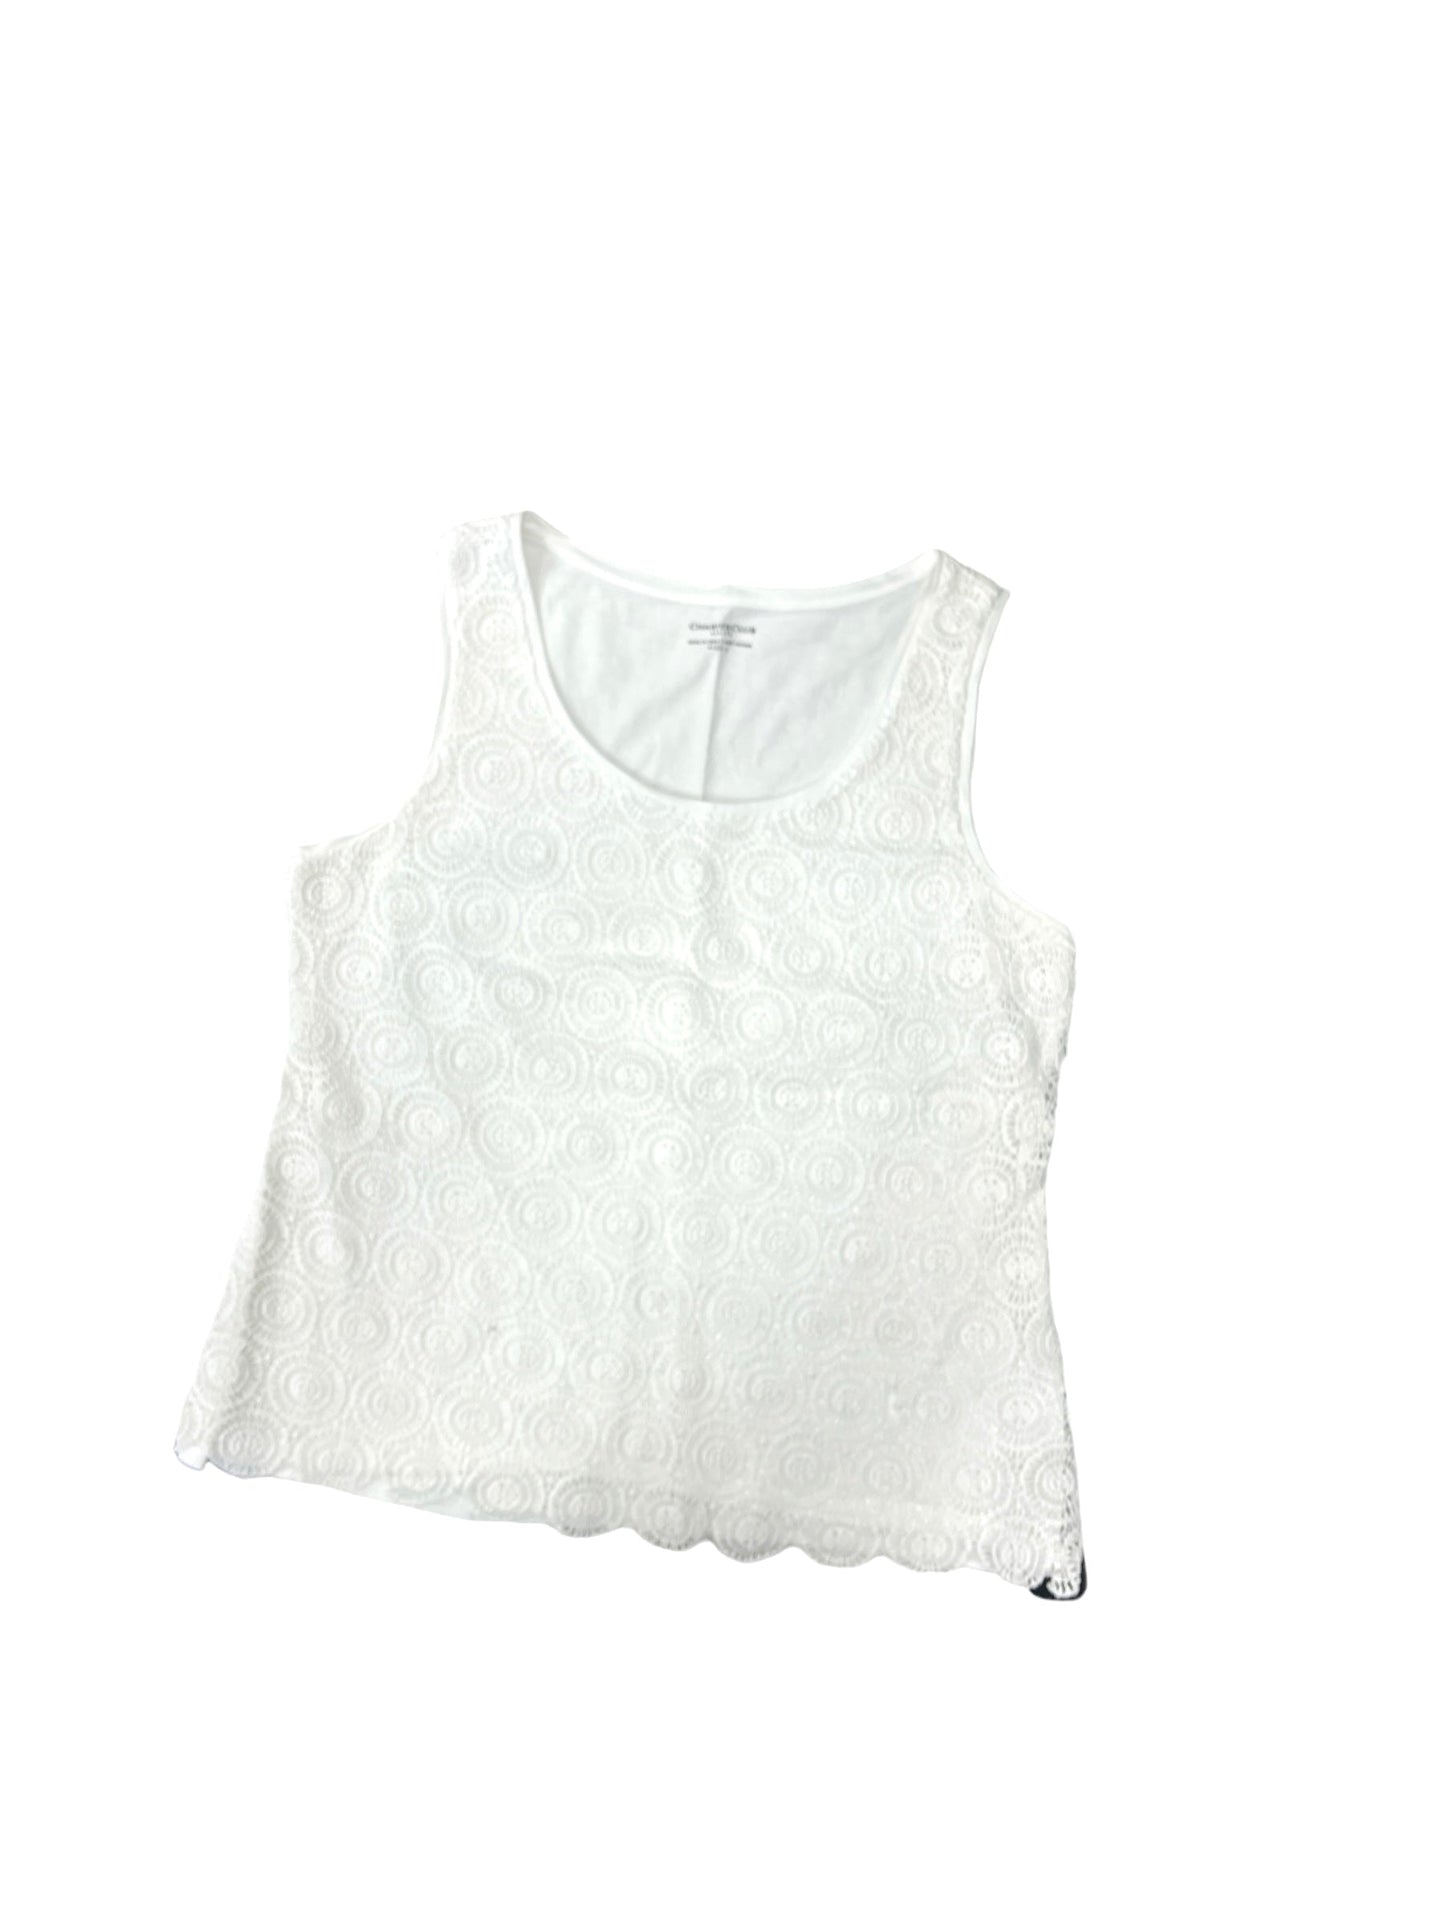 White Top Sleeveless Charter Club, Size L